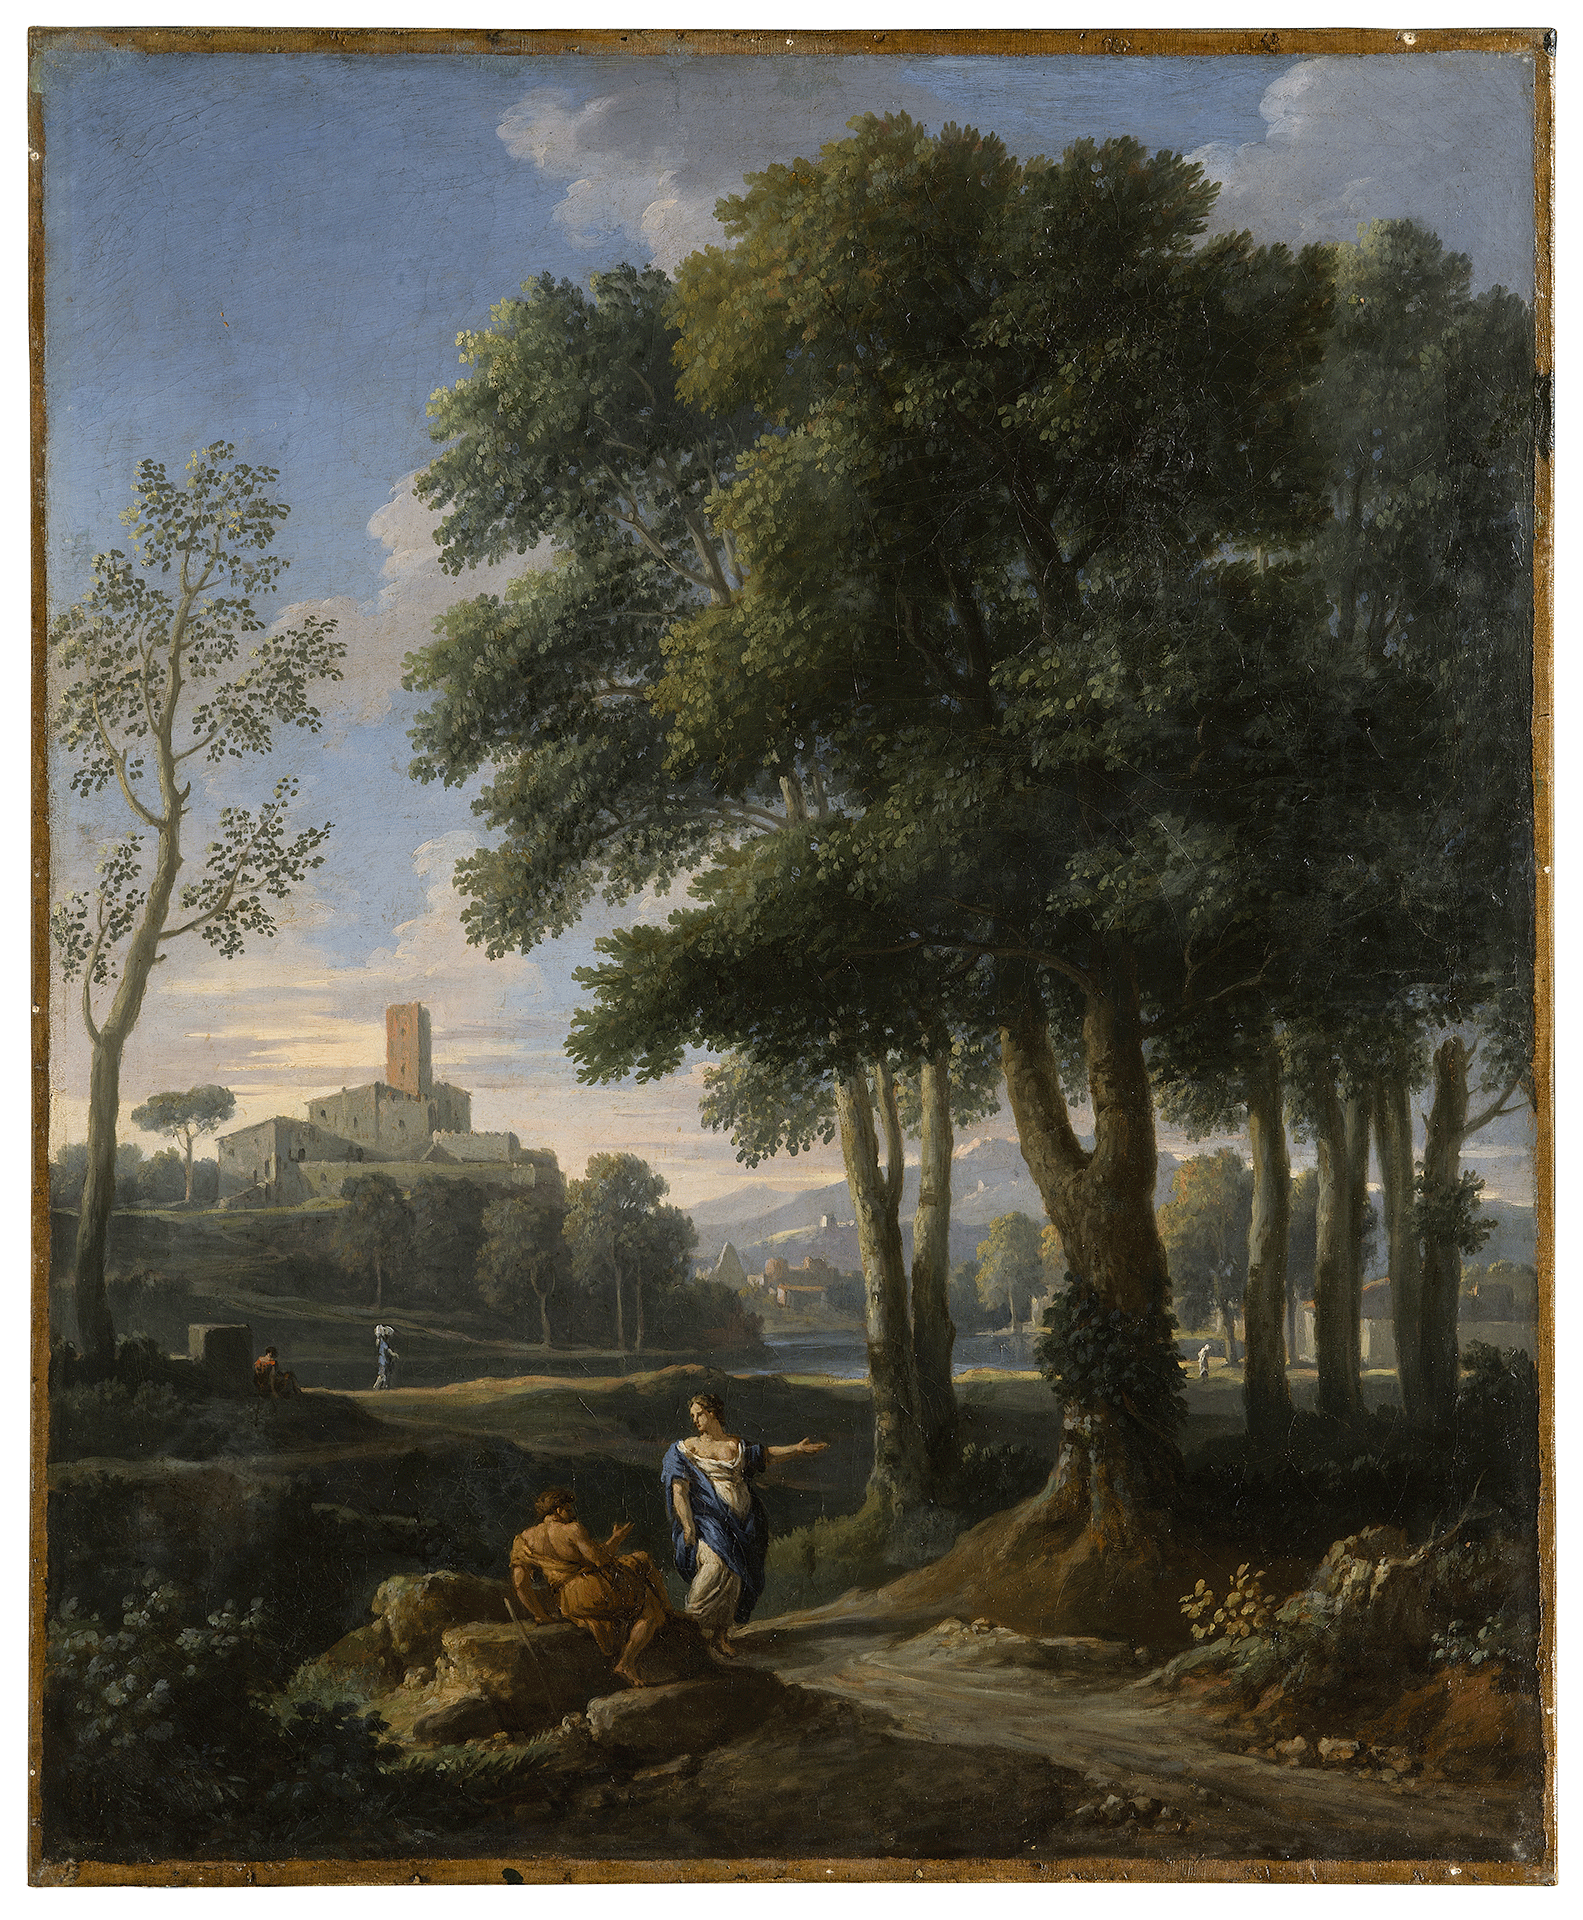 Roman Landscape with figures and a small town in the background